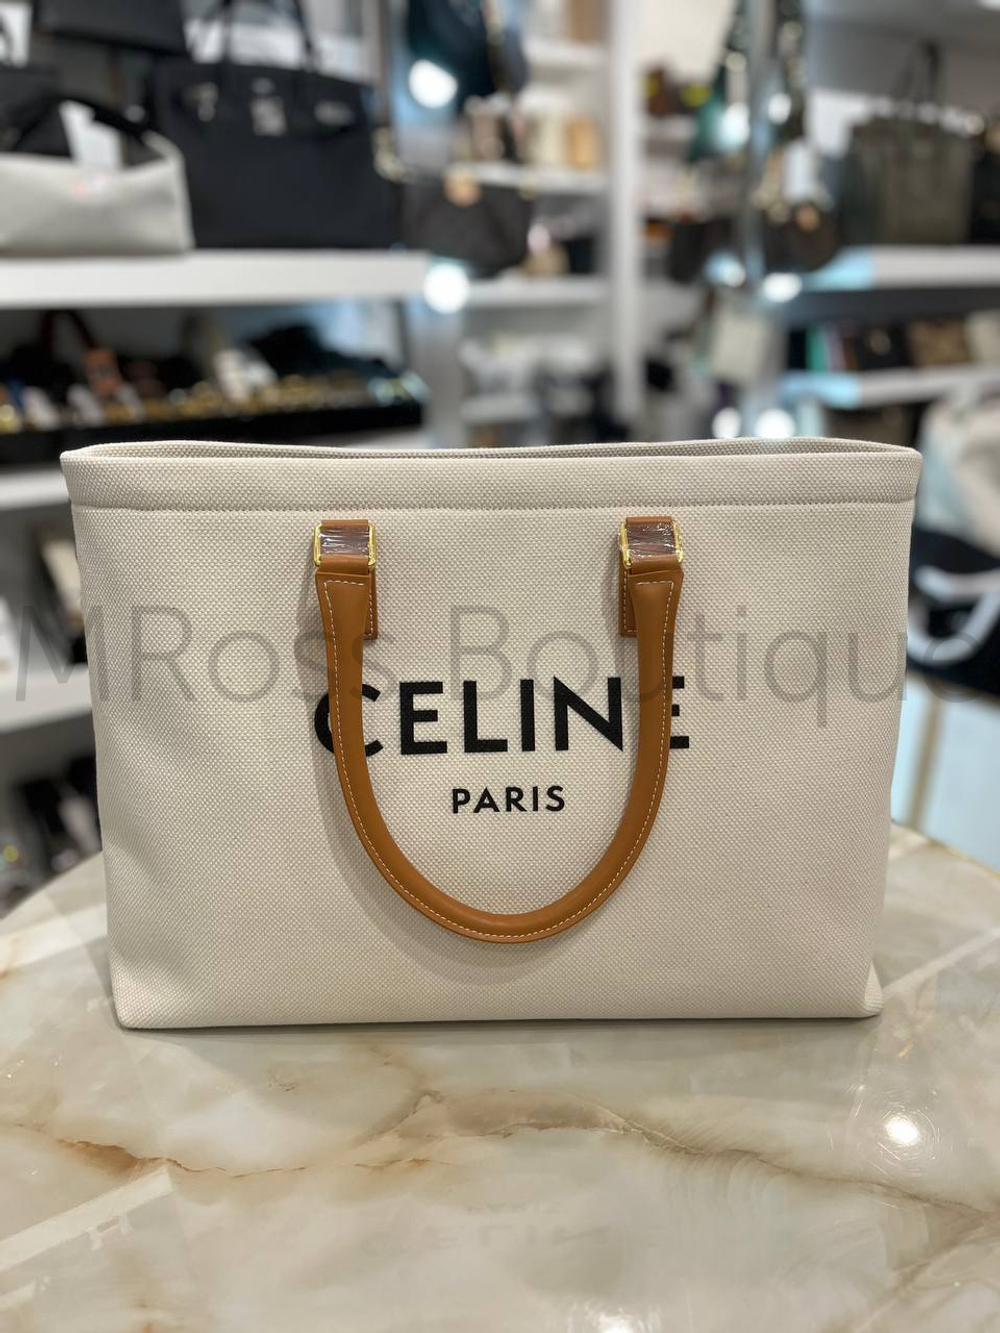 Celine Cabas Drawstring premium women's shopper bag crafted from canvas with brown calfskin inserts. Discreet beach bag with black Celine lettering on the front, brown leather handles and an inside zip pocket.